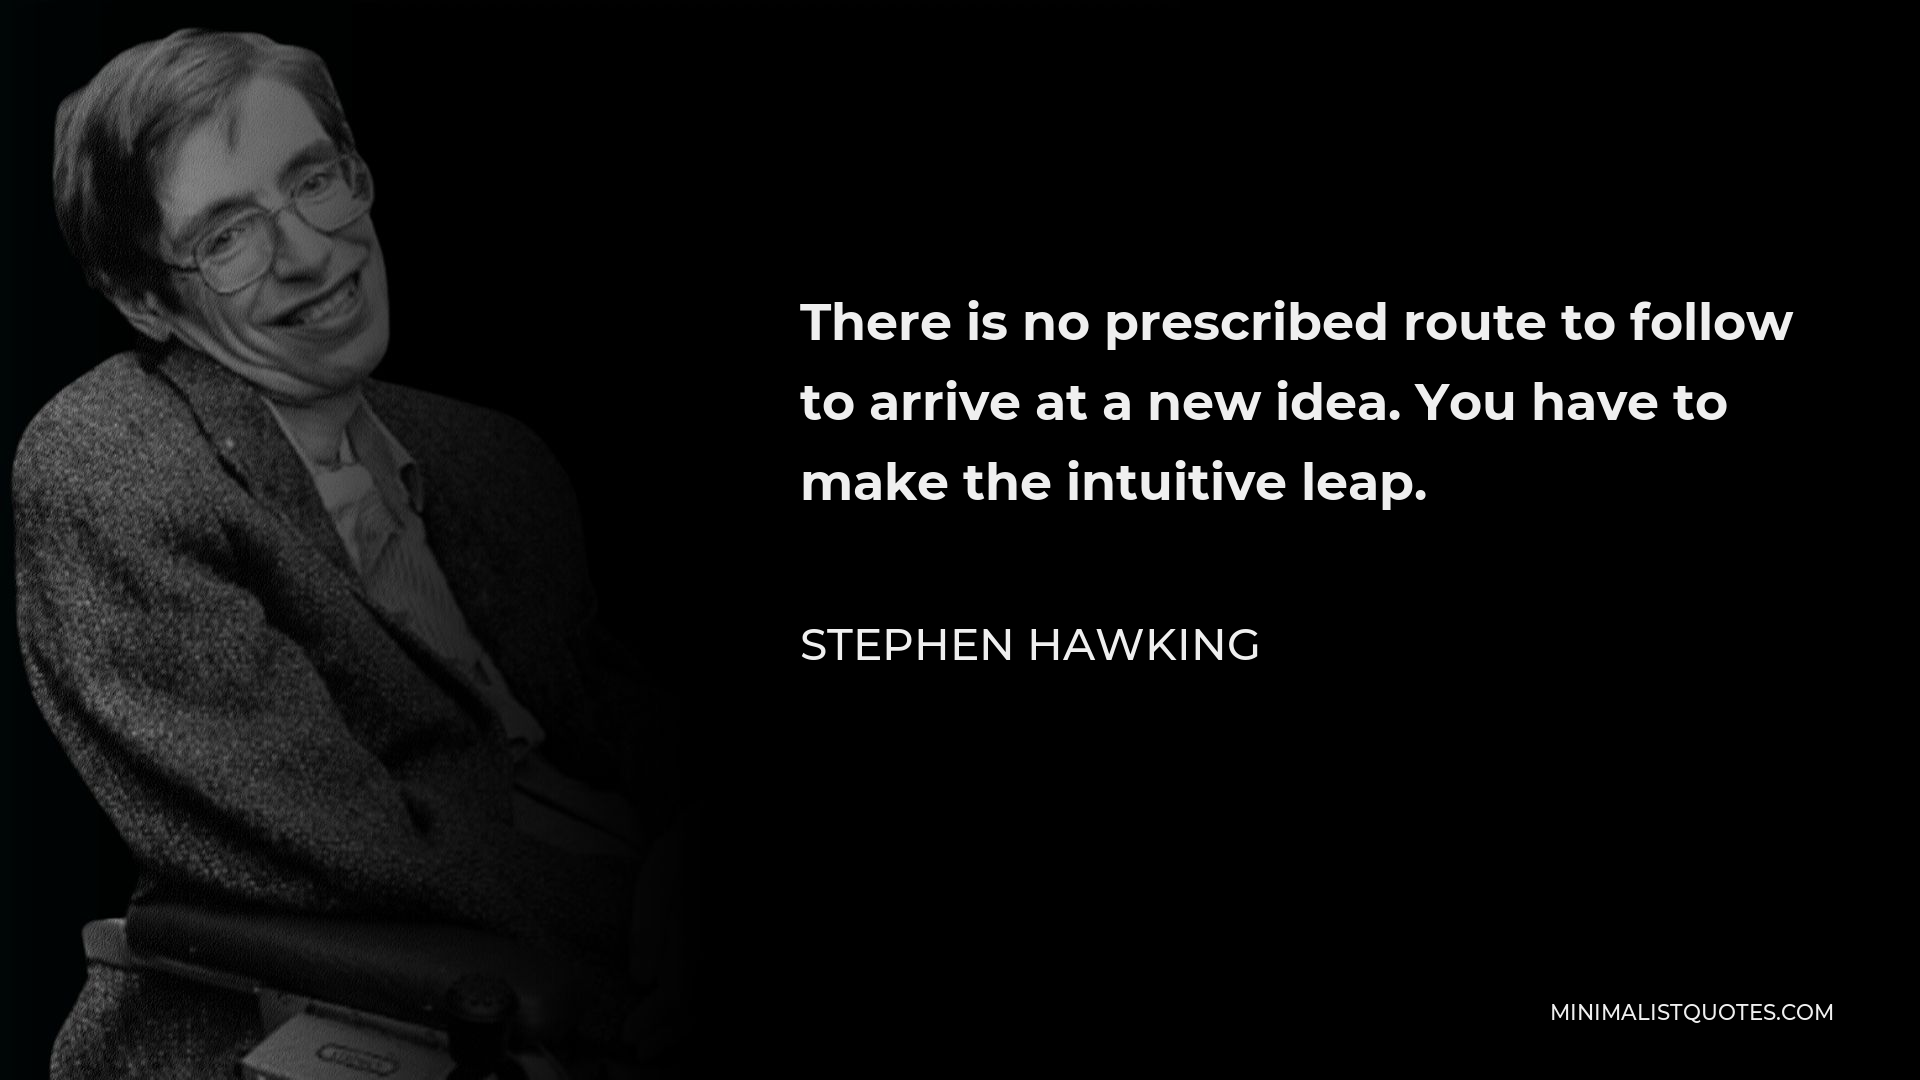 Stephen Hawking Quote - There is no prescribed route to follow to arrive at a new idea. You have to make the intuitive leap.